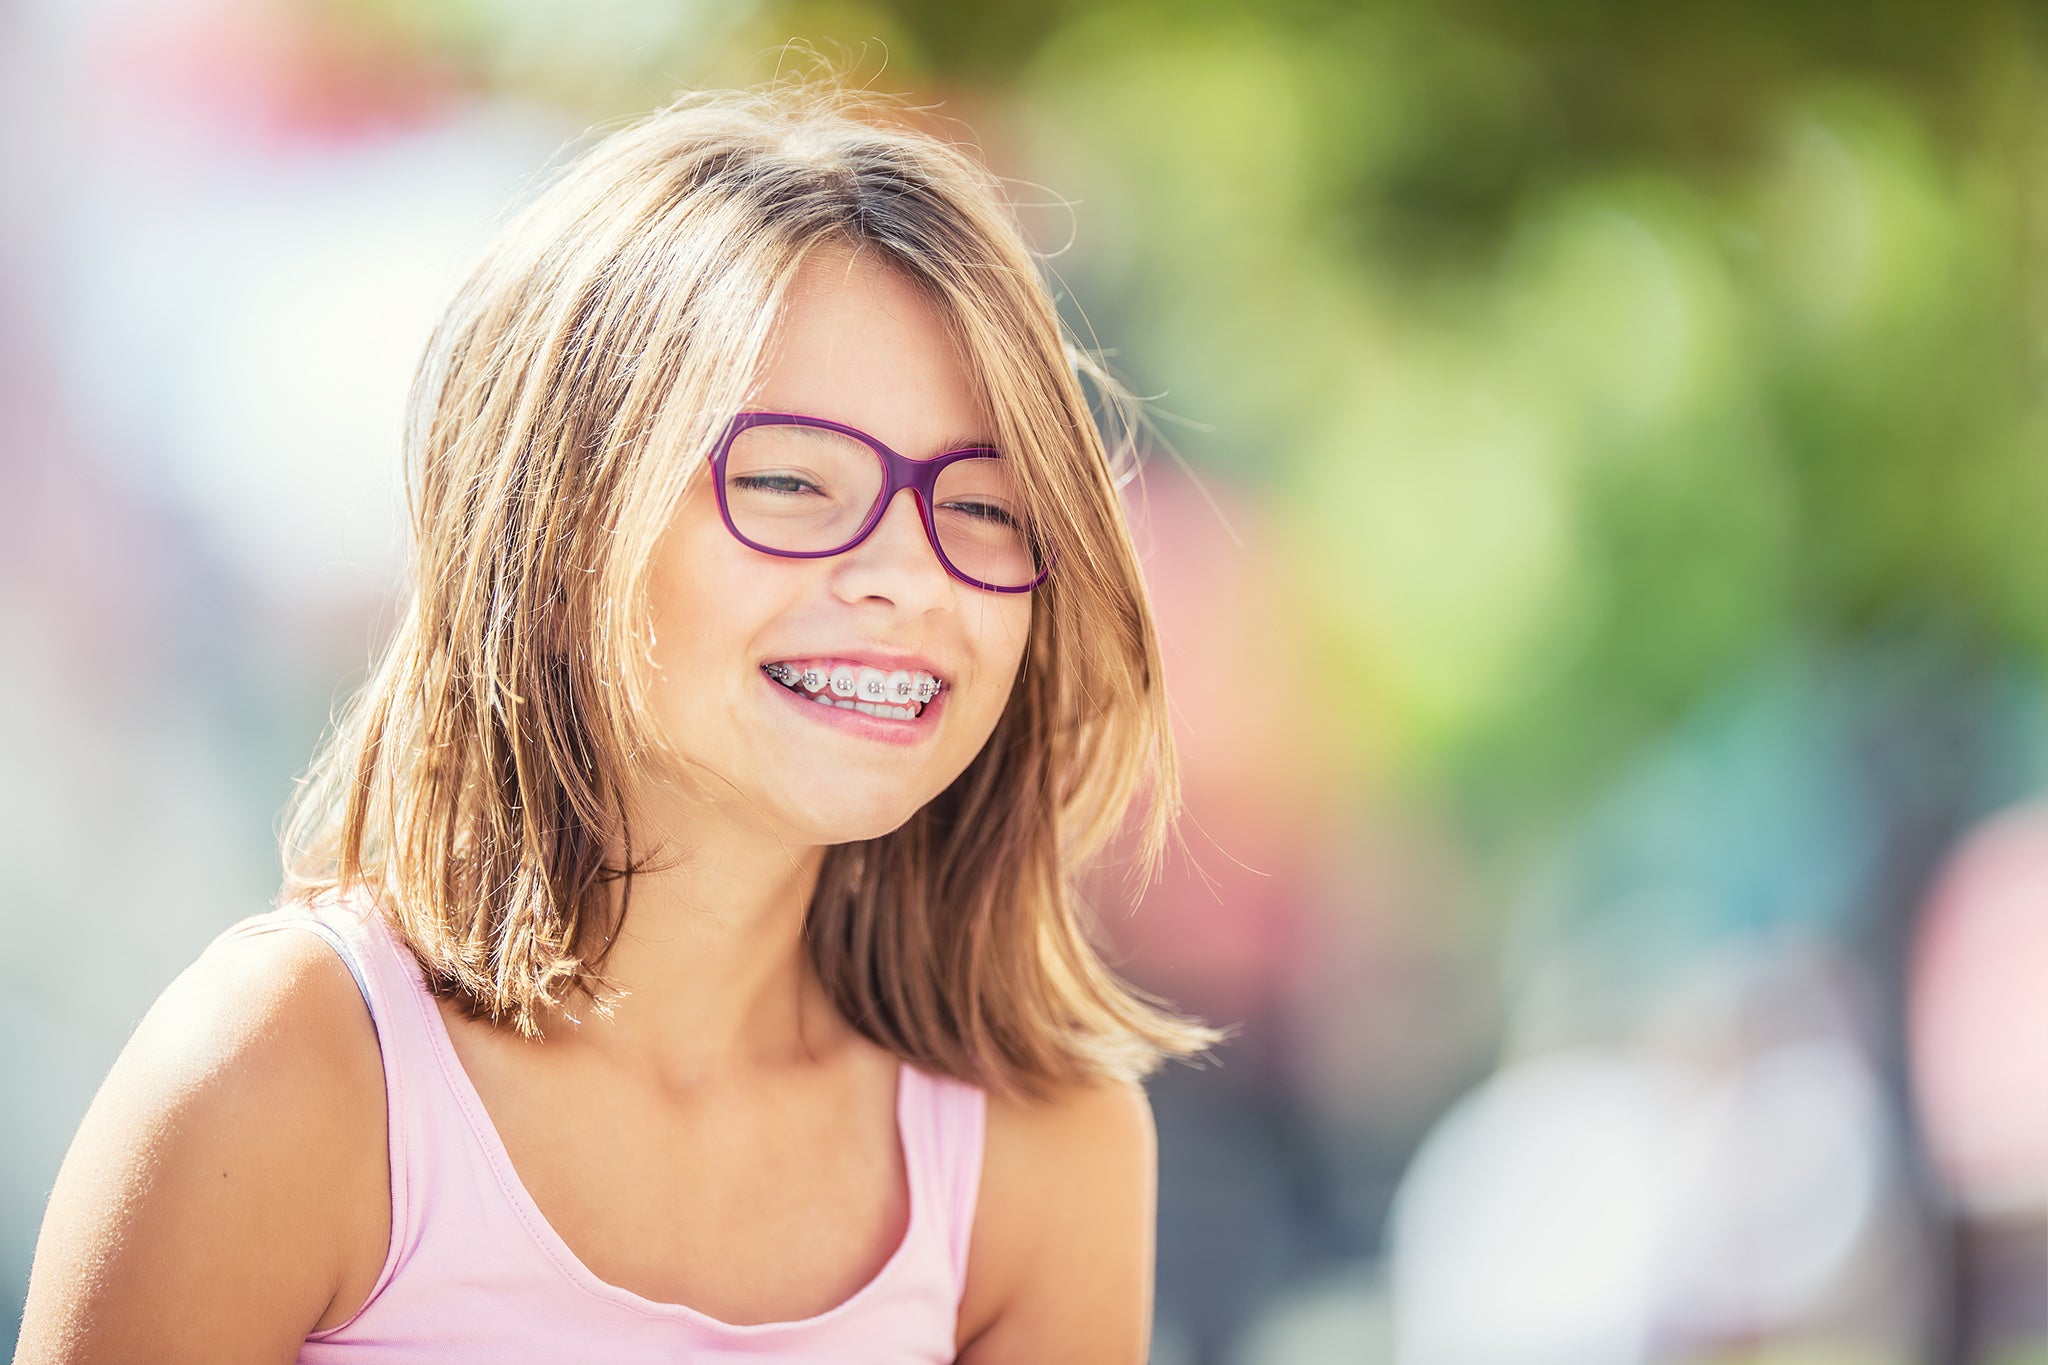 Happy smiling girl with dental braces and glasses. Young blond kid wearing teeth braces and purple glasses